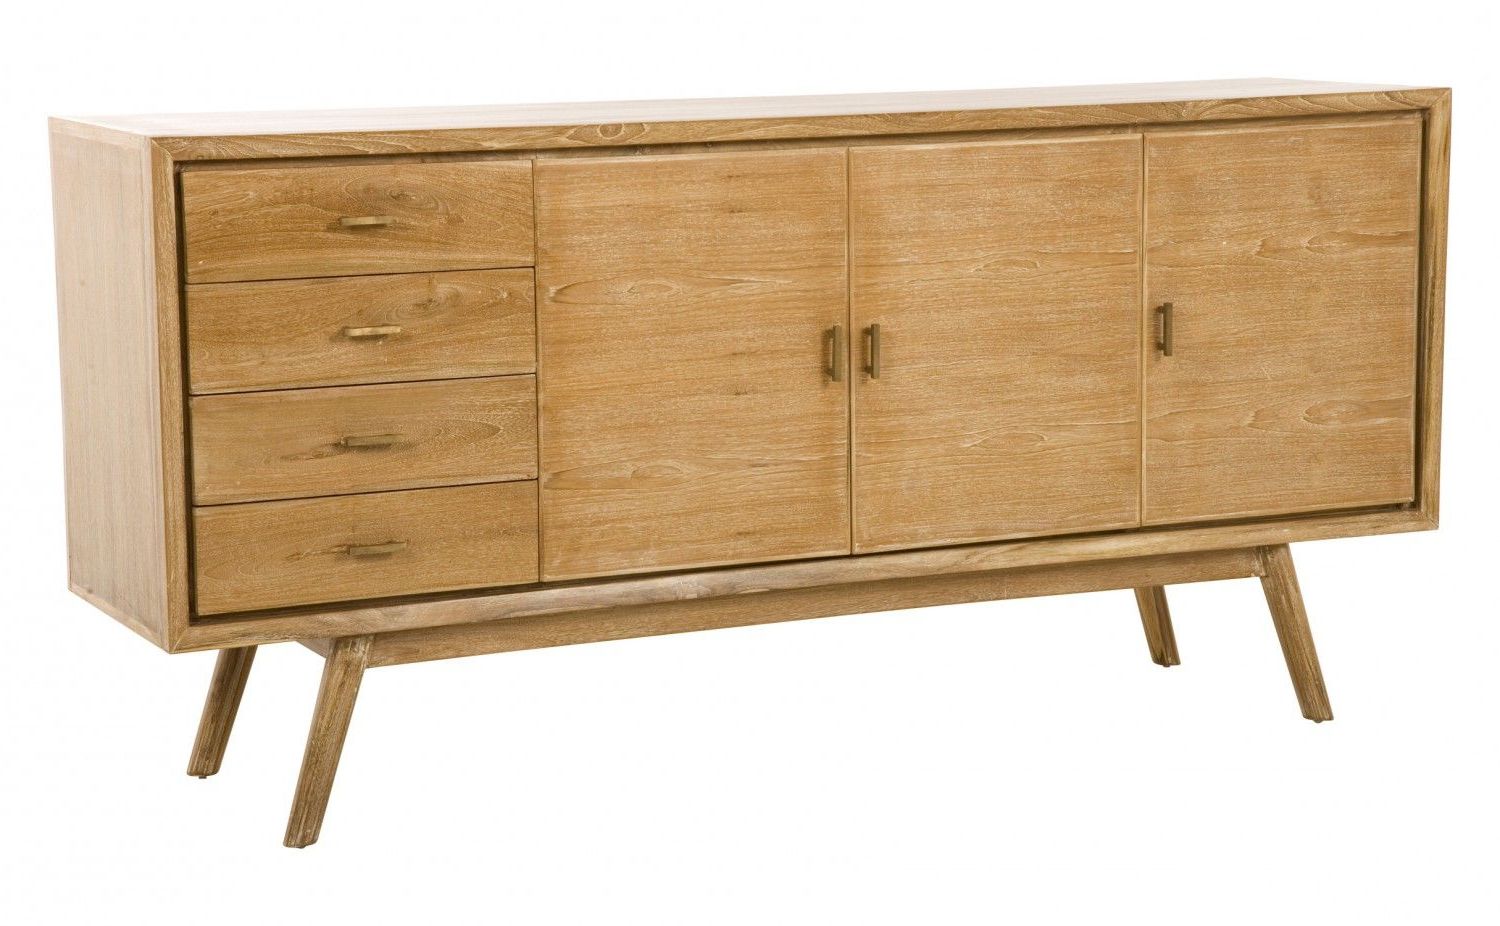 Marks Sideboard (View 7 of 20)